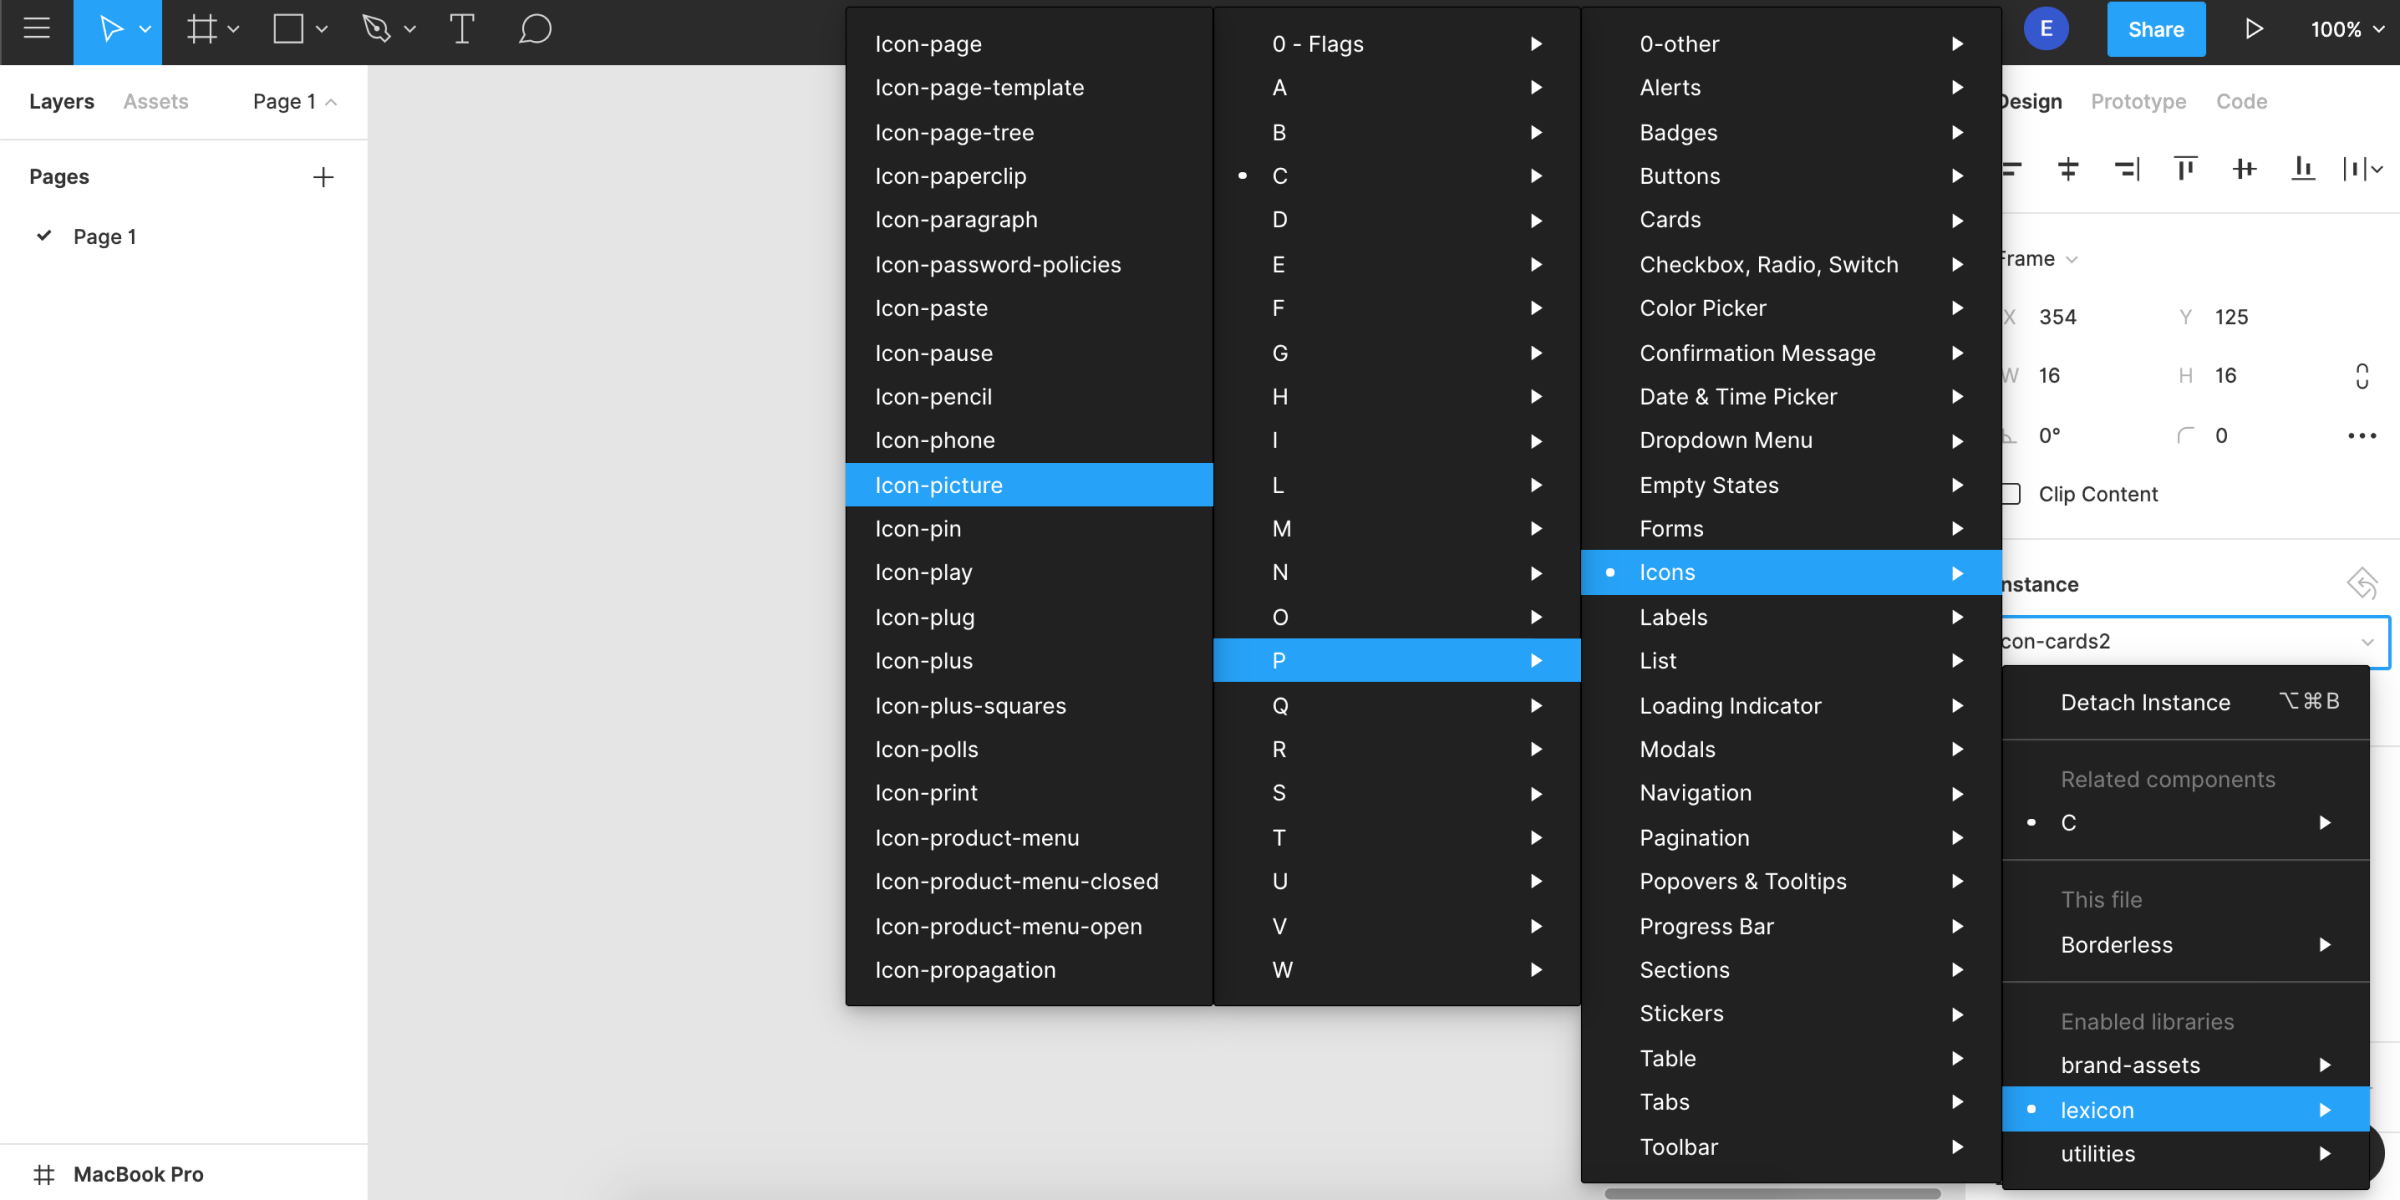 The instance menu is open, showing the alphabetical order of the icons in Figma.